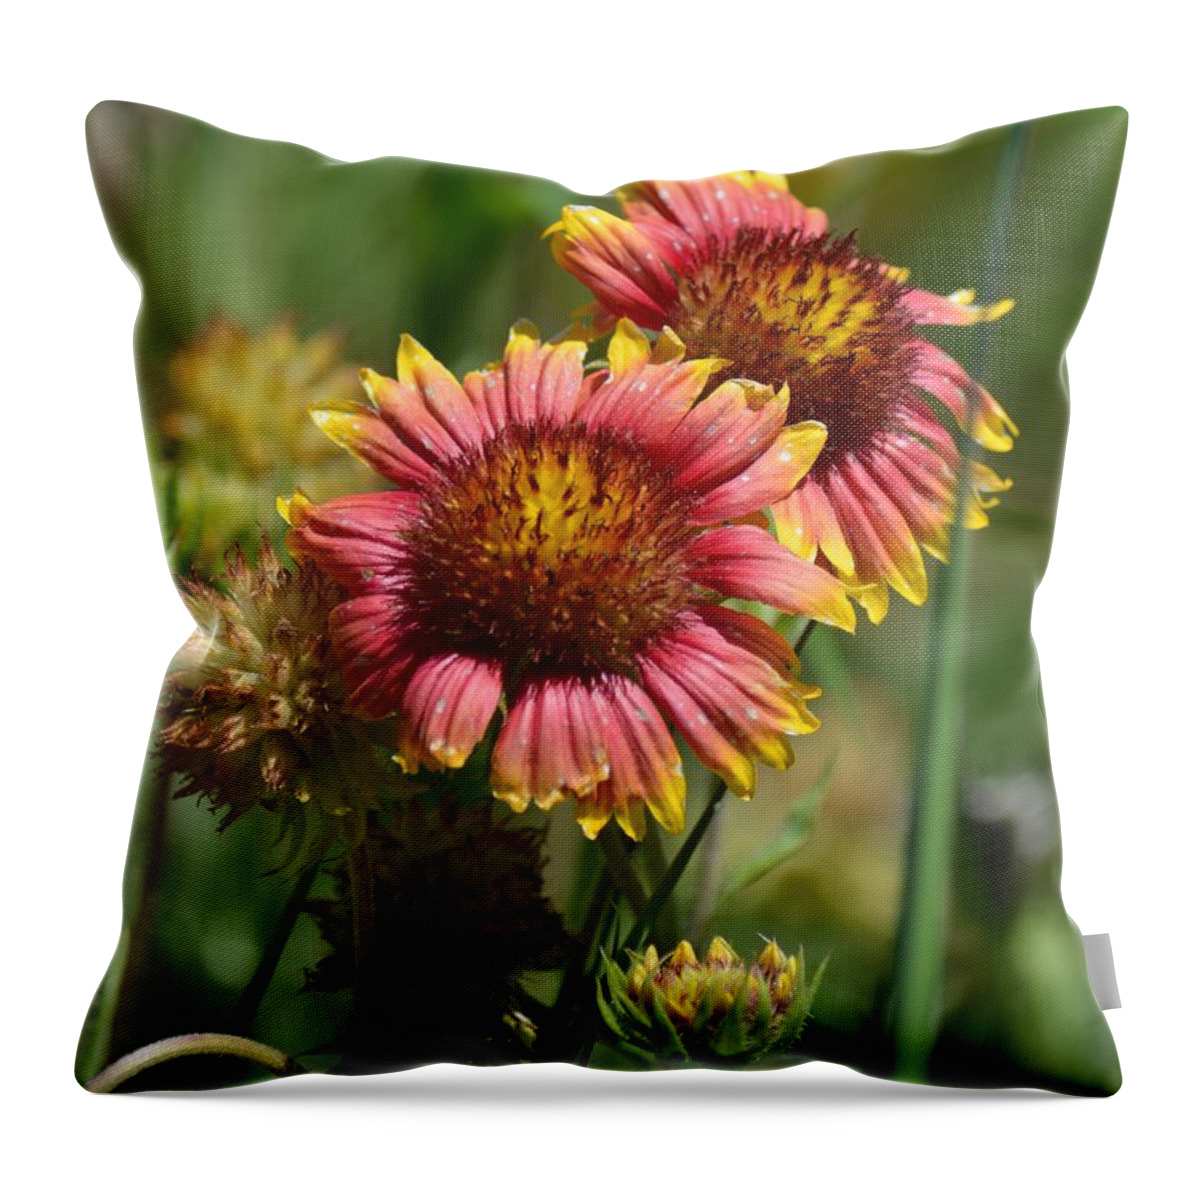 Autumn Spice 15-01 Throw Pillow featuring the photograph Autumn Spice 15-01 by Maria Urso